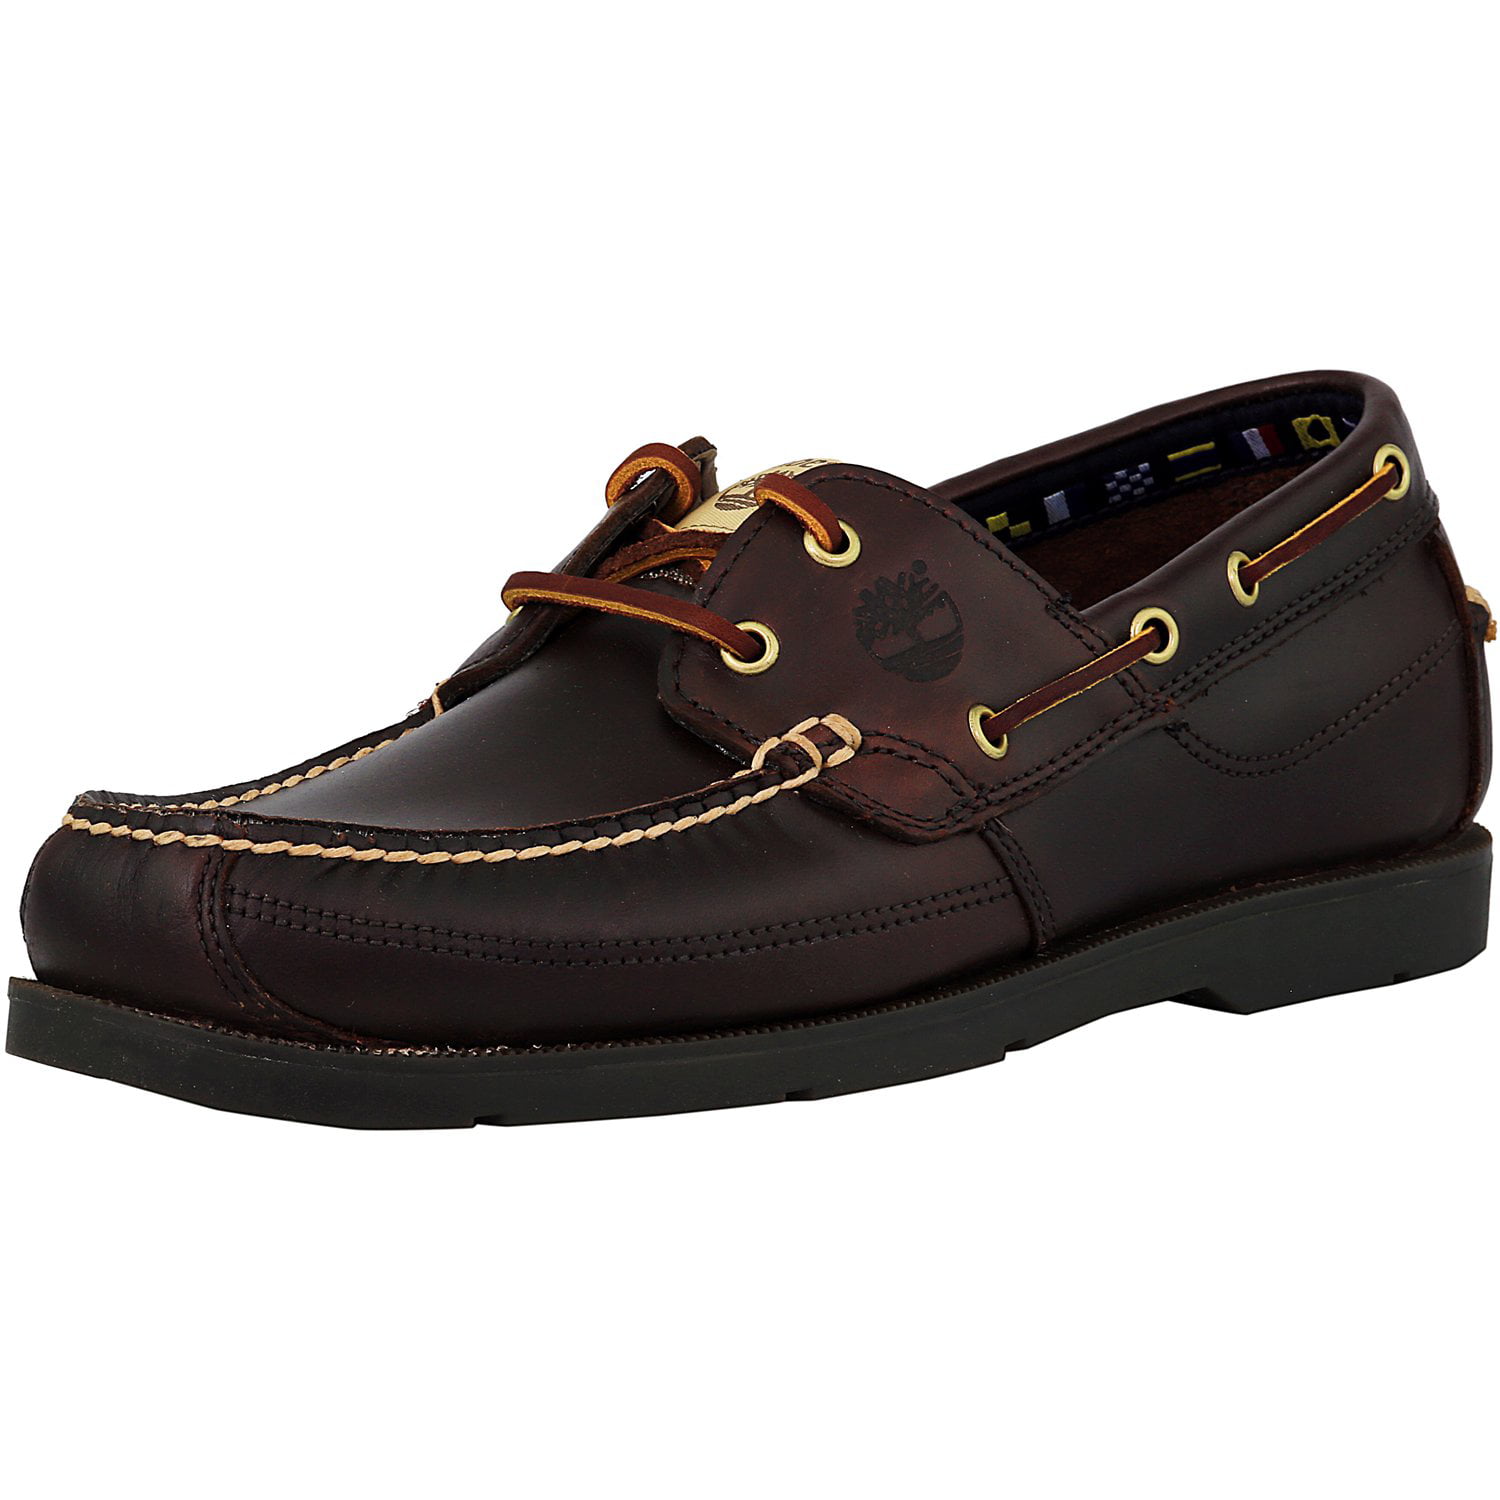 Timberland Men's Earthkeepers Kiawah Bay Boat Brown Ankle-High Leather ...